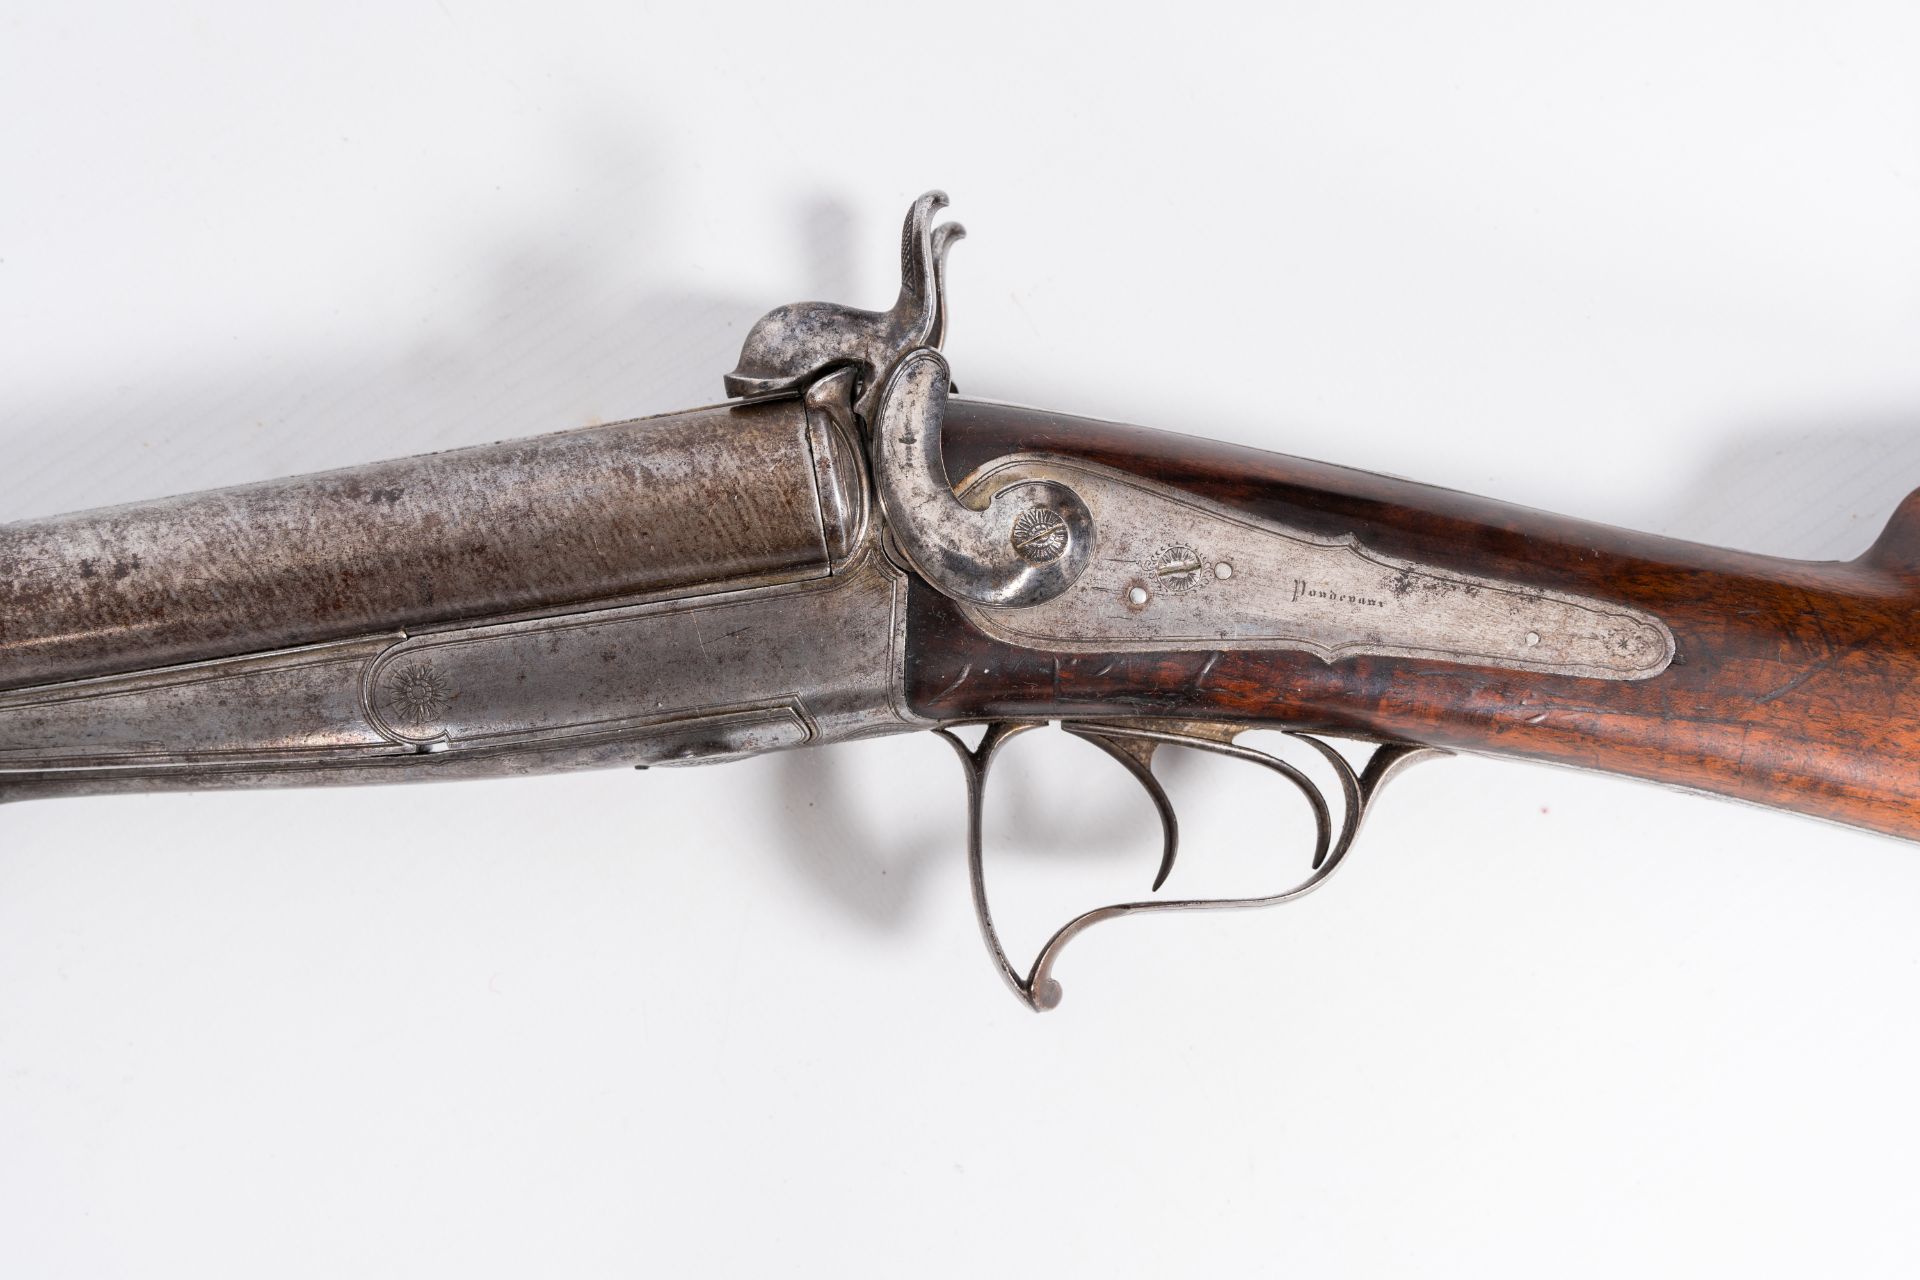 A French double barrel pinfire shotgun with a damask barrel, marked Pondevaux - St. Etienne, 19th C. - Image 5 of 6